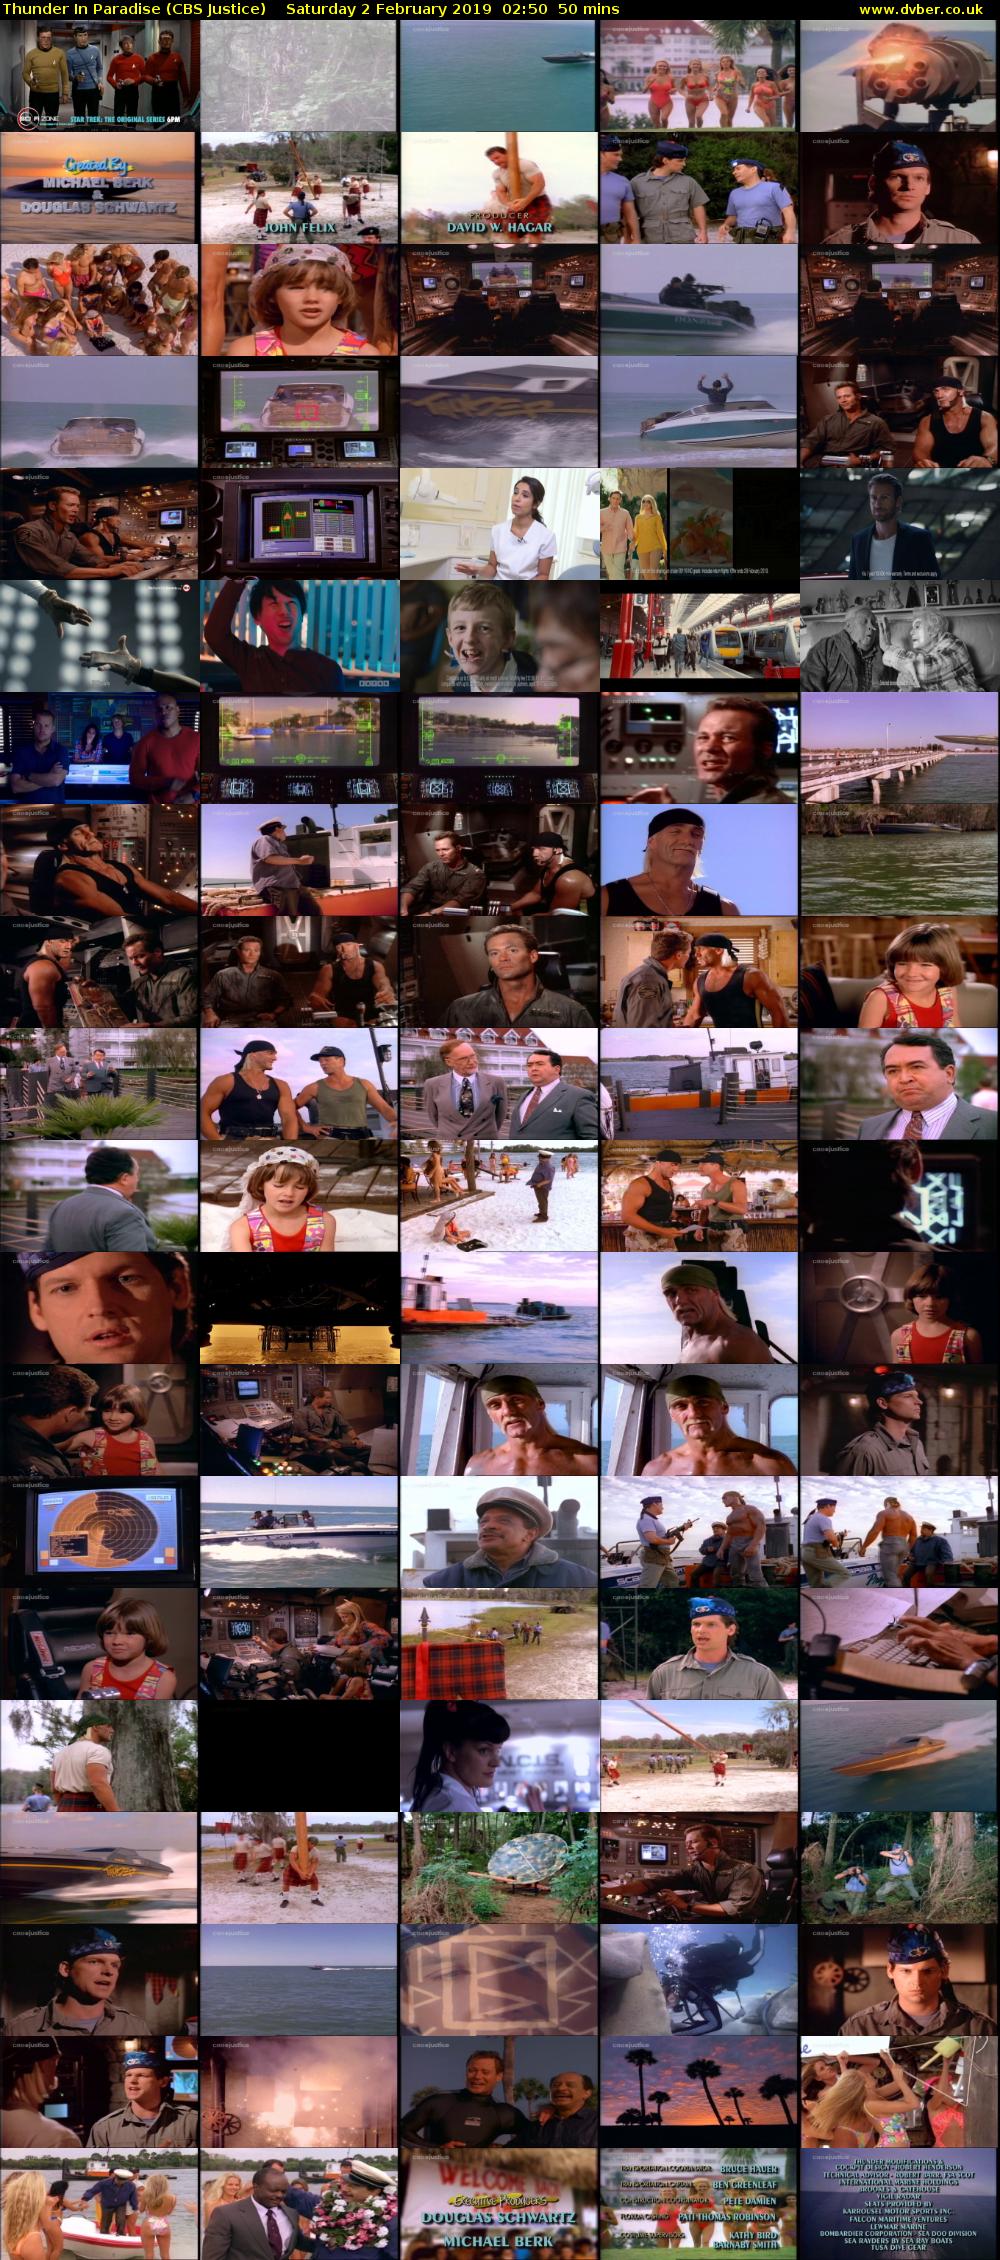 Thunder In Paradise (CBS Justice) Saturday 2 February 2019 02:50 - 03:40